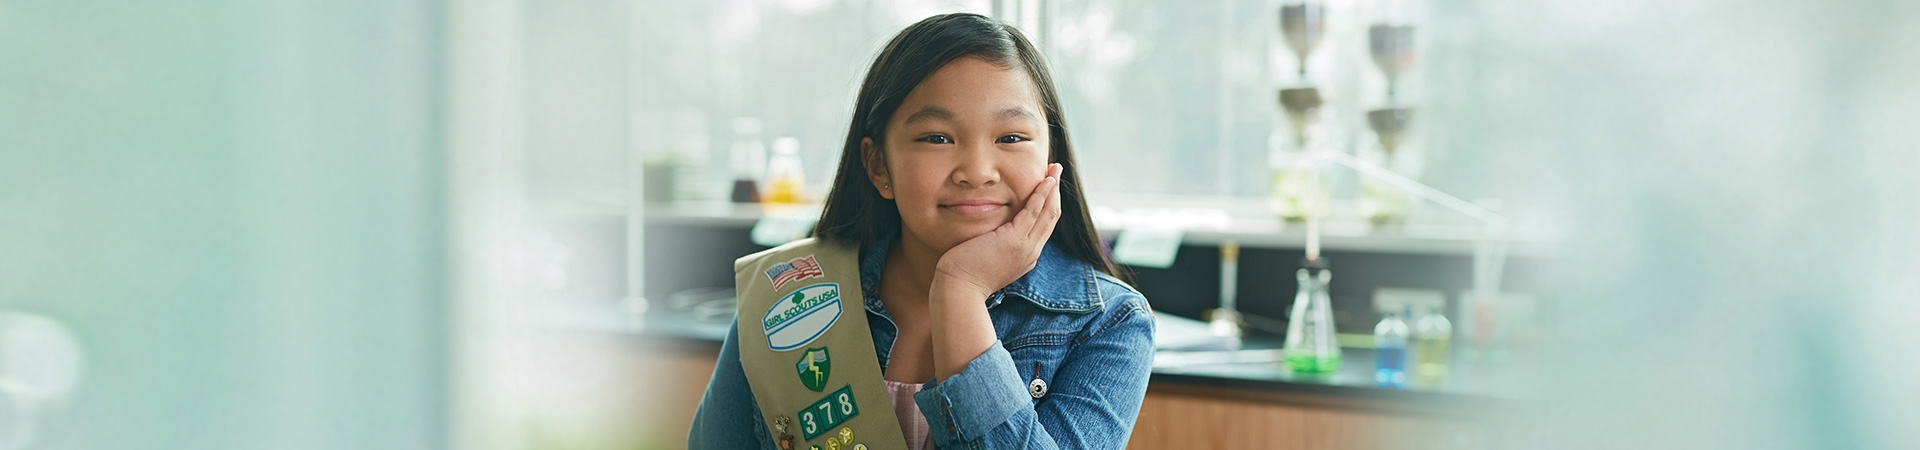  cadette girl scout in sash uniform in school classroom smiling at camera 